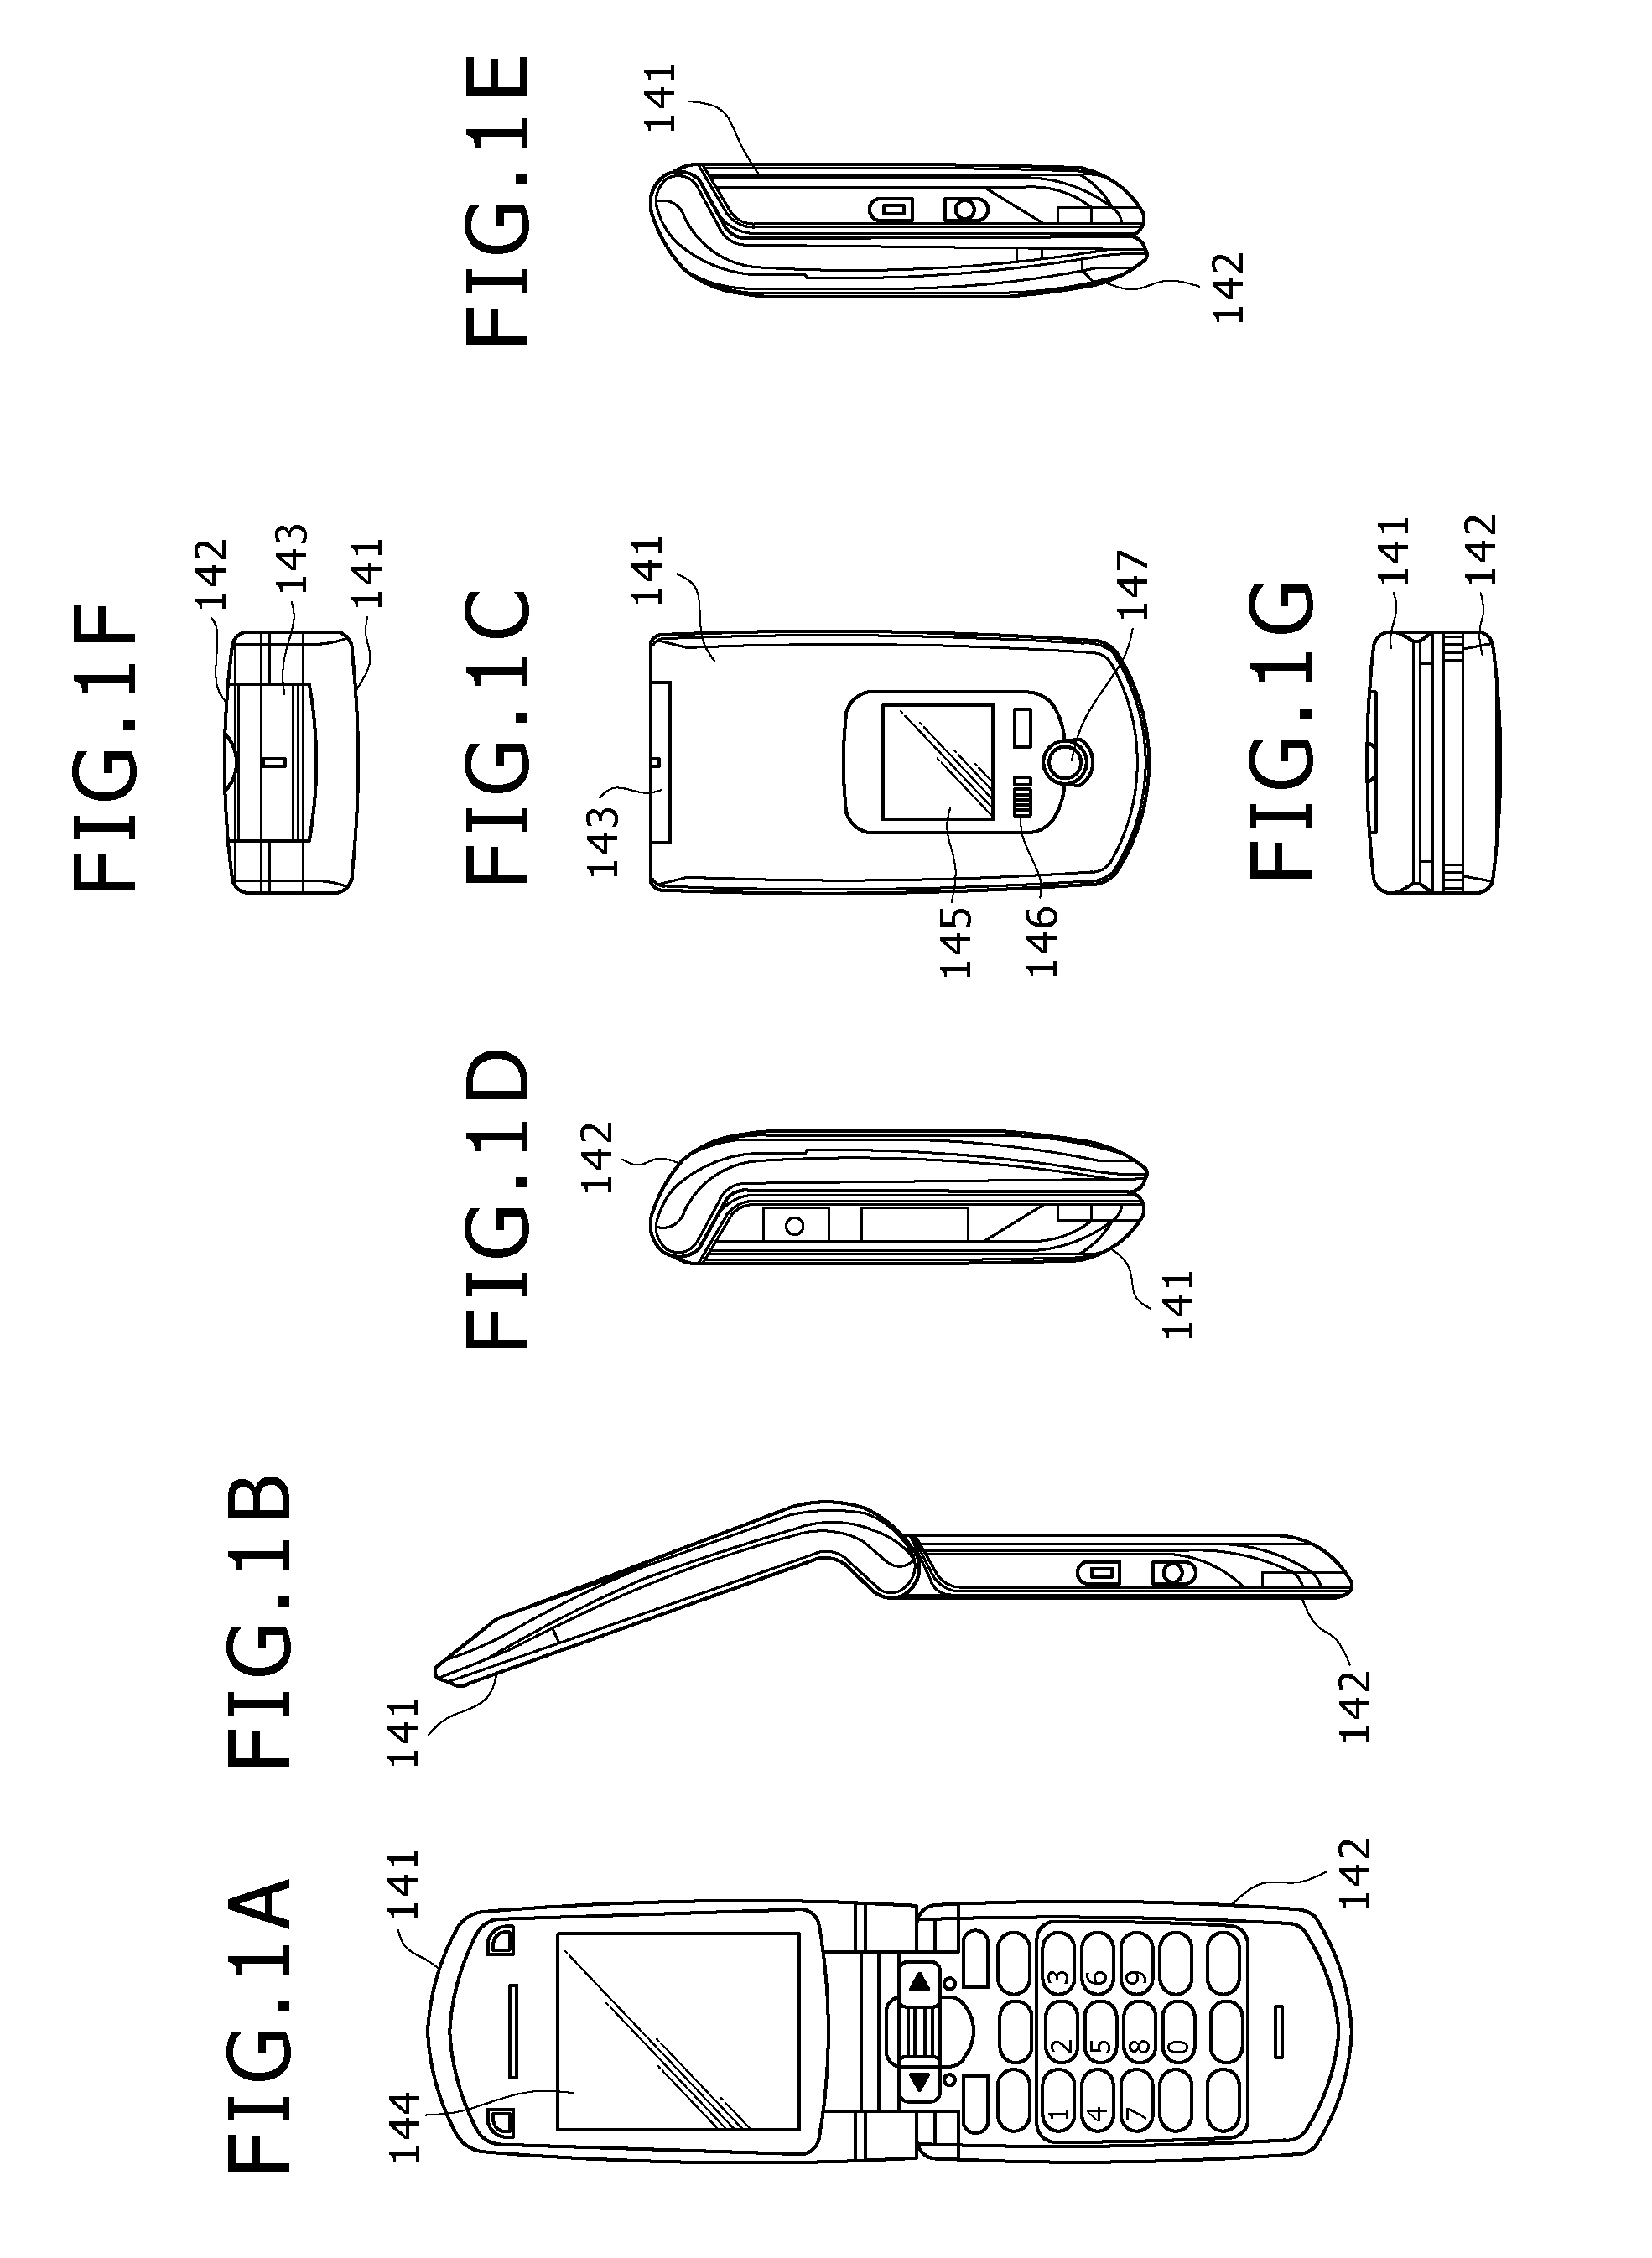 Light guide plate, display apparatus and electronic device